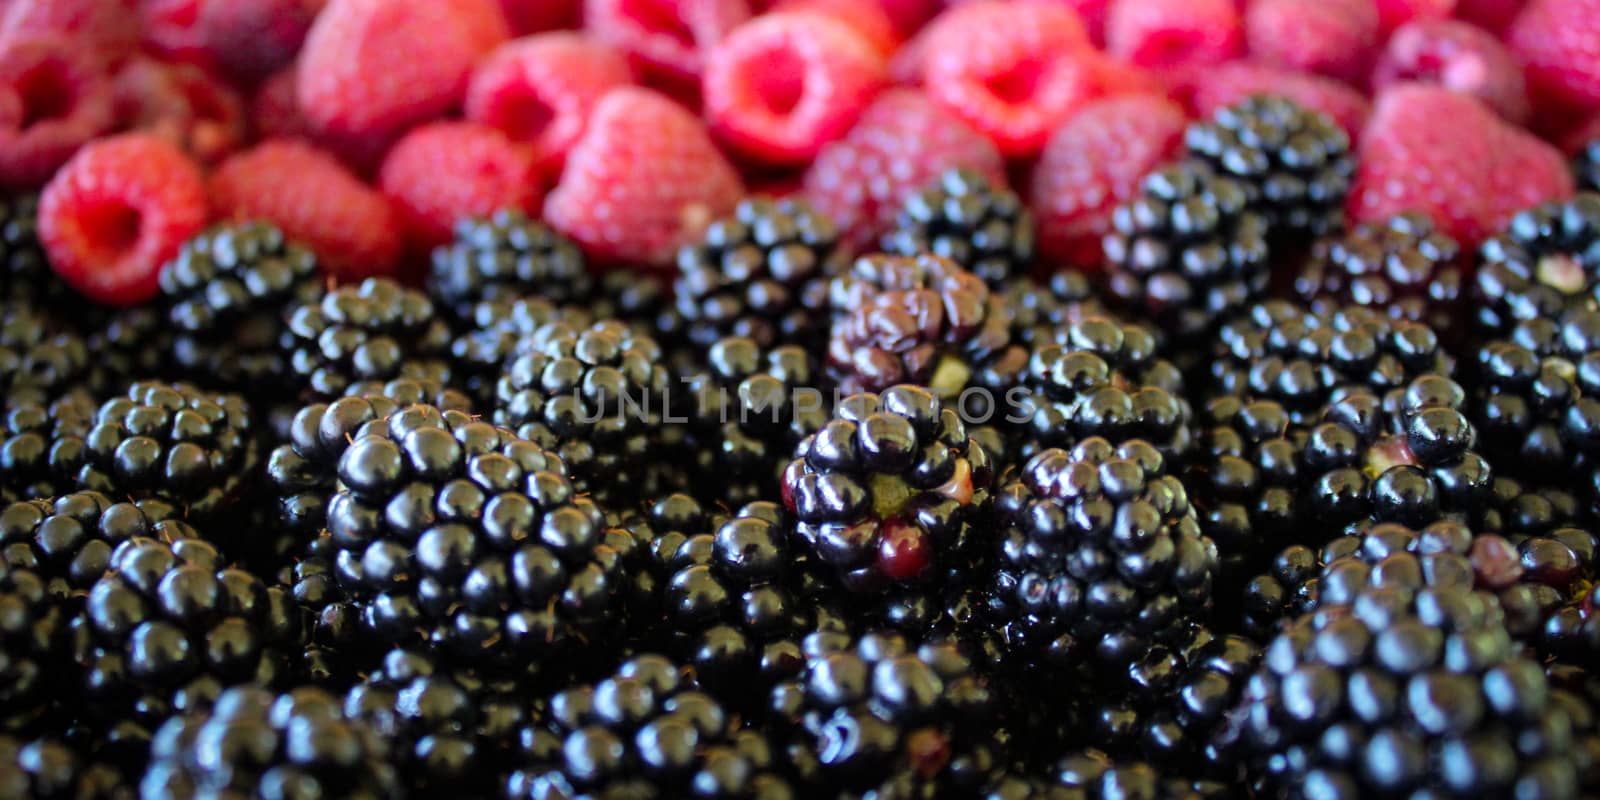 Banner. Close up of blackberries and raspberries in the background. by mahirrov